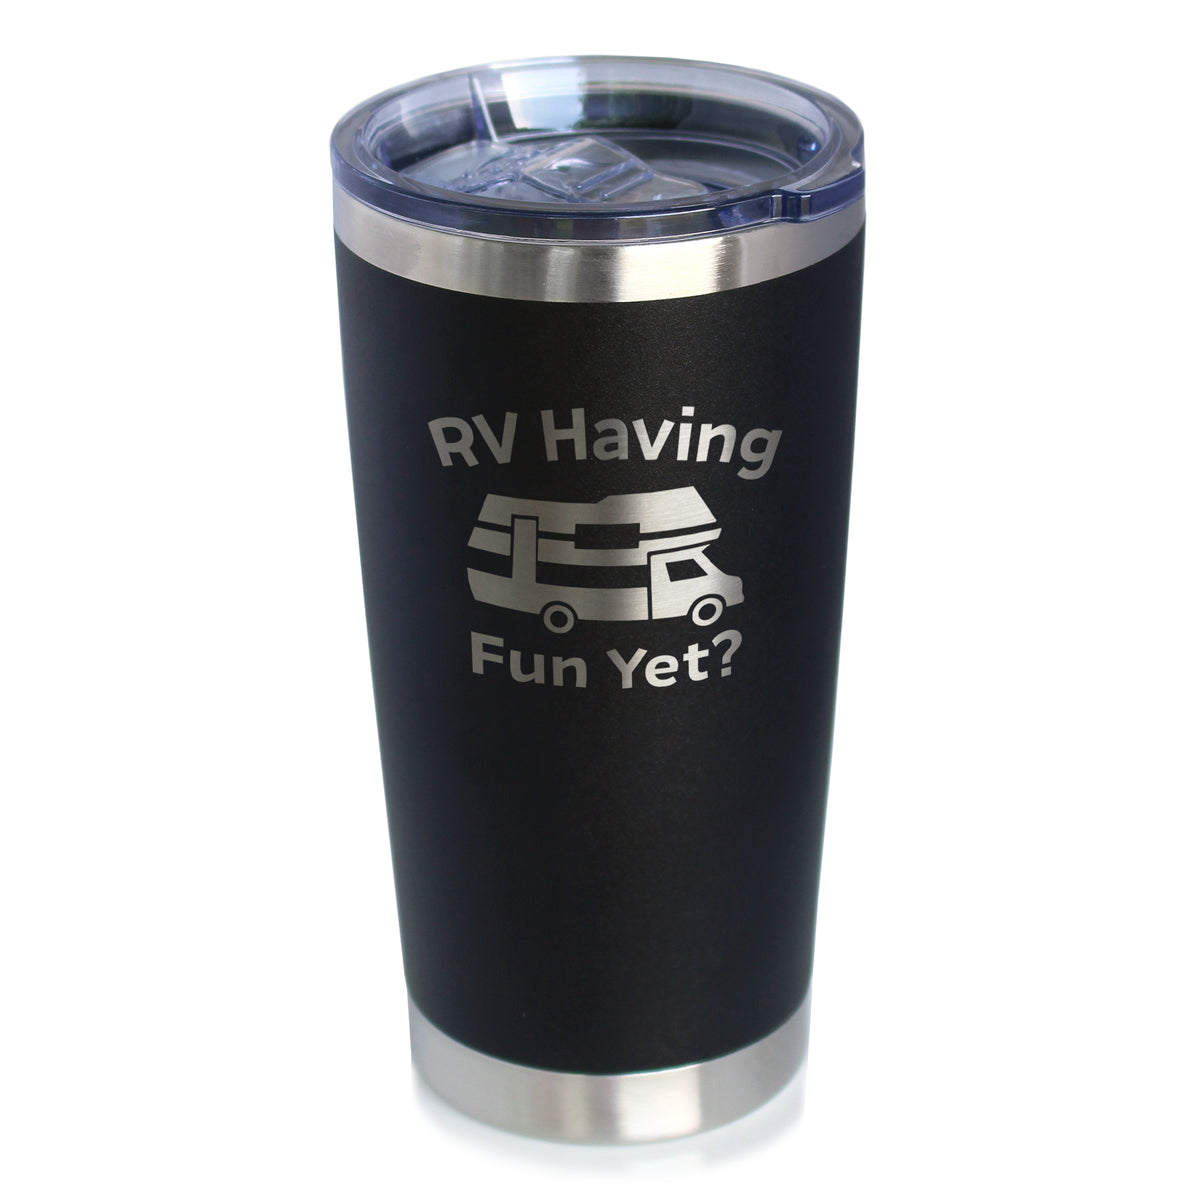 RV Having Fun Yet - Insulated Coffee Tumbler Cup with Sliding Lid - Stainless Steel Insulated Mug - Cute Outdoor Camping Mug